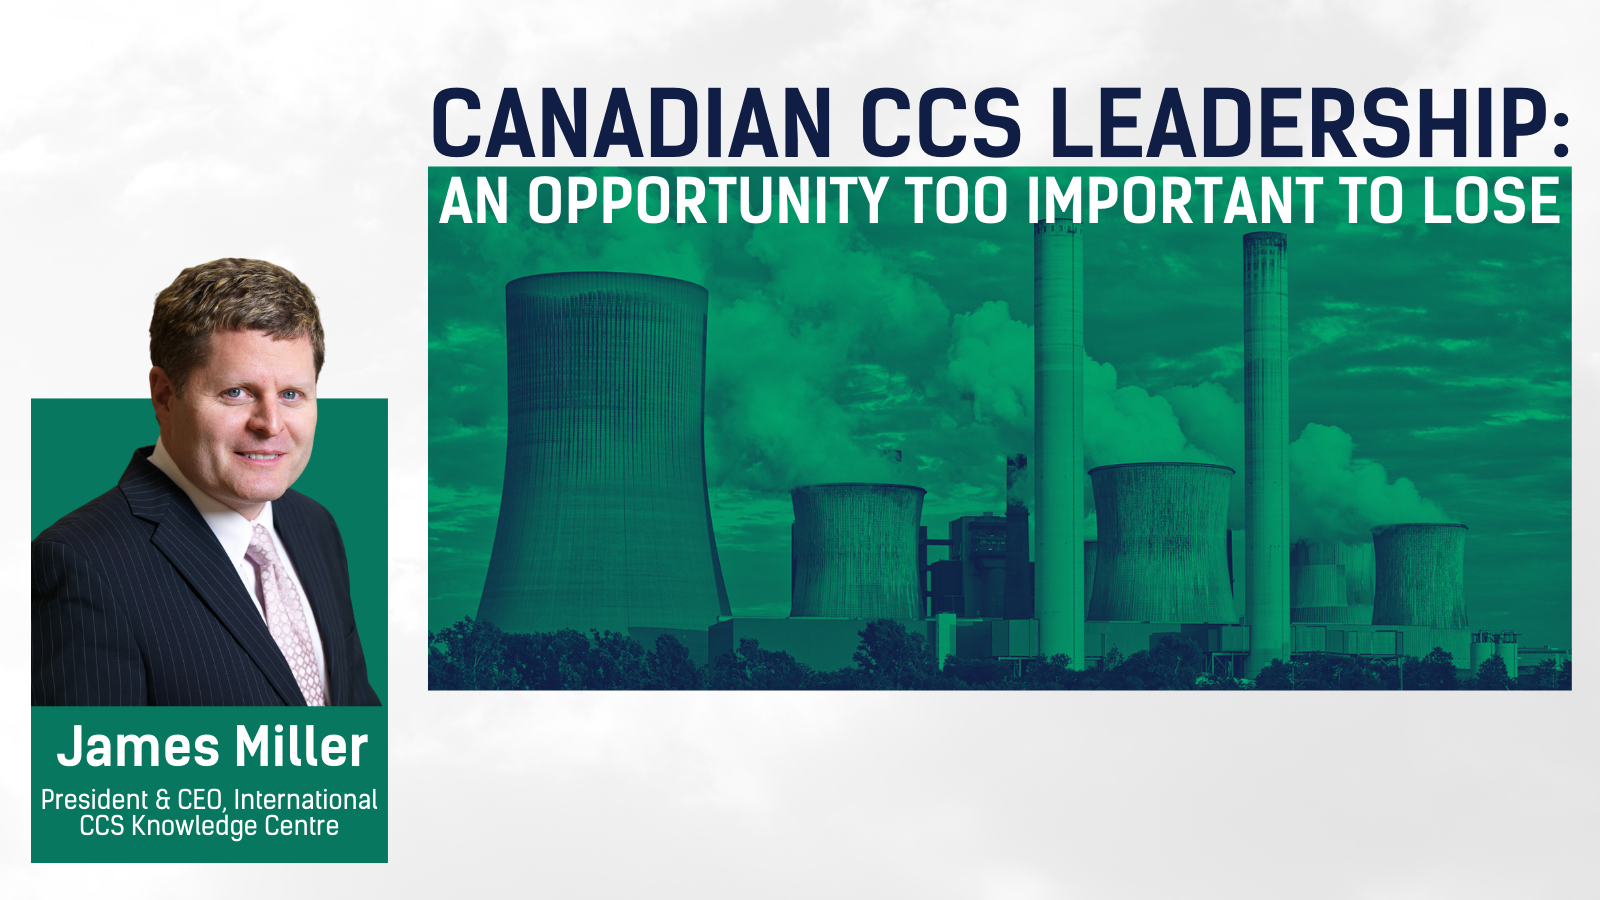 a banner with the title "Canadian CCS leadership – an opportunity too important to lose" over an image of smoke stacks and the headshot of a white man